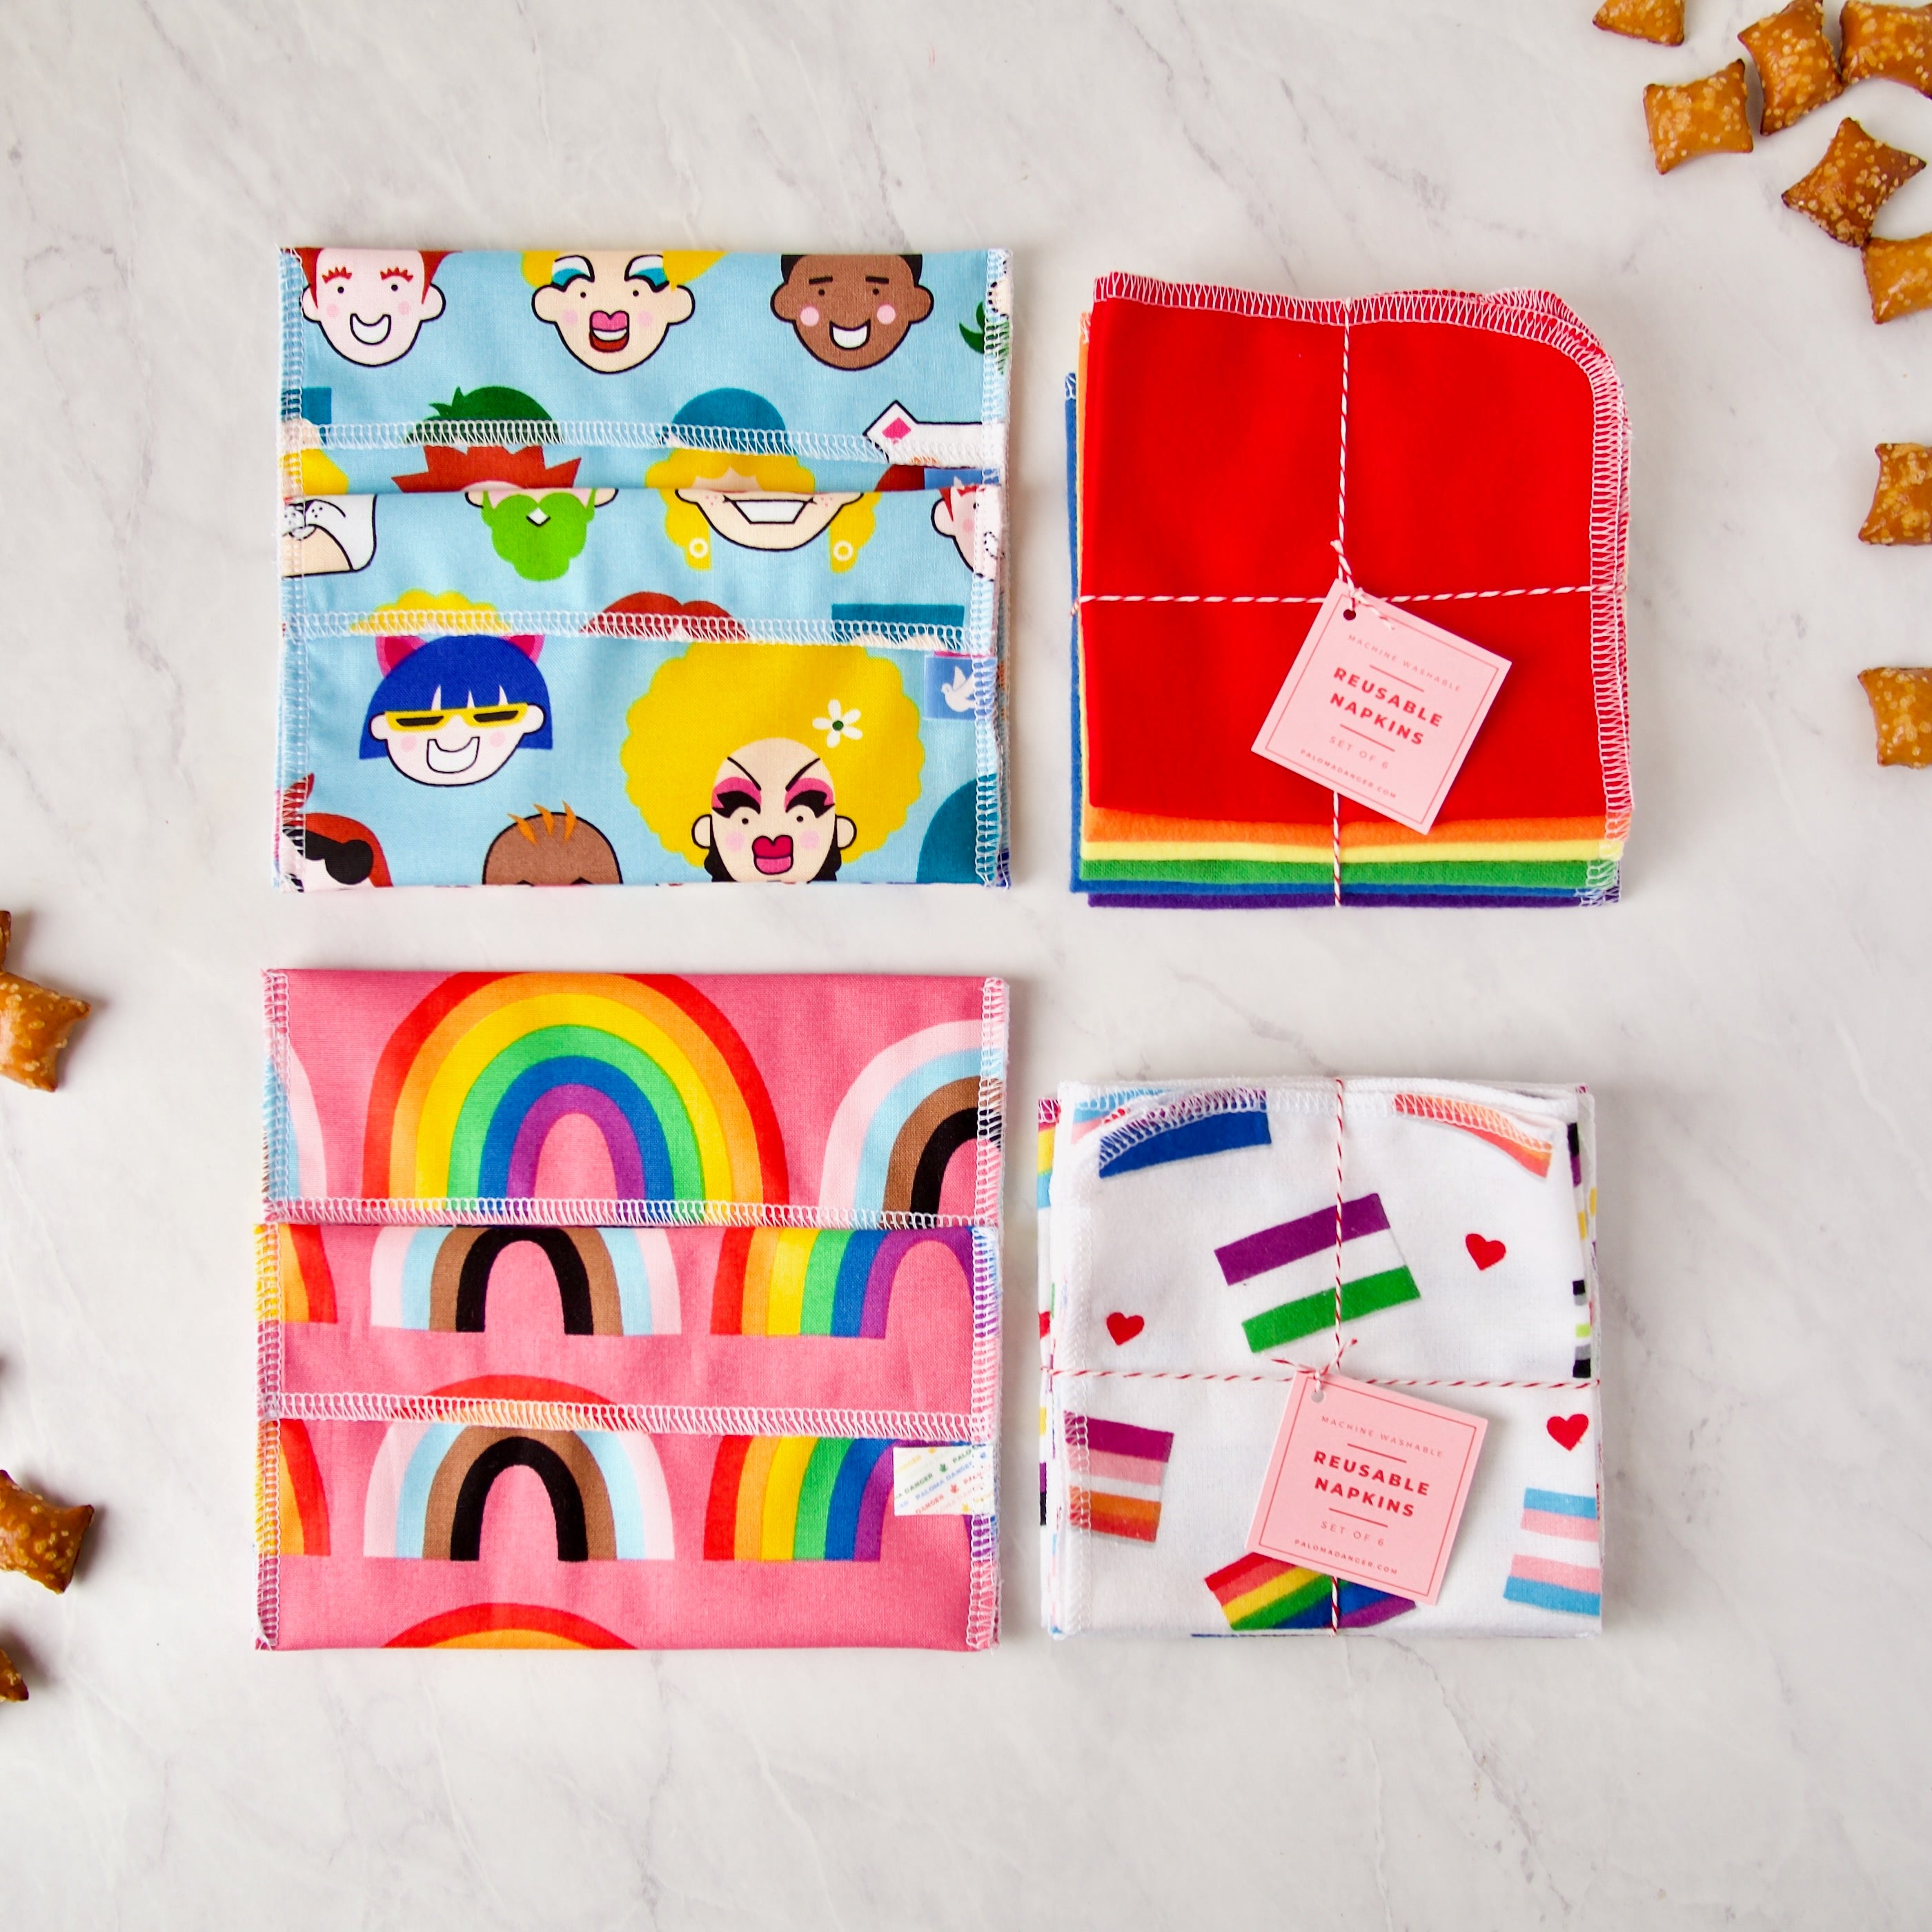 Pride Mini Collection featuring reusable snack bags and napkins in pride colors and prints